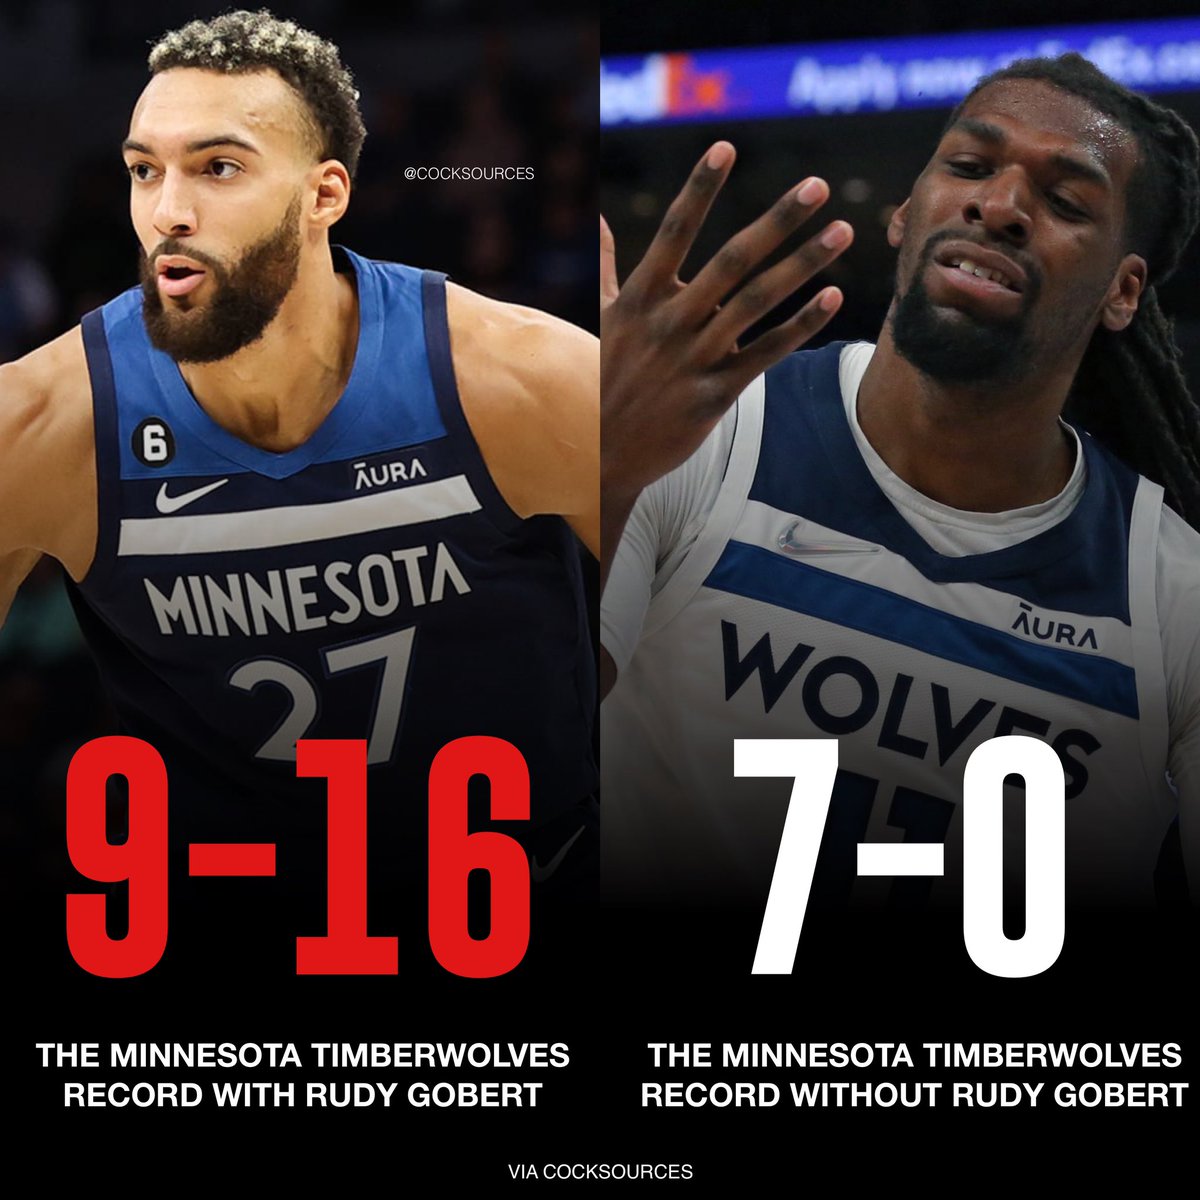 The Rudy Gobert trade will go down as the WORST trade of all time 😭